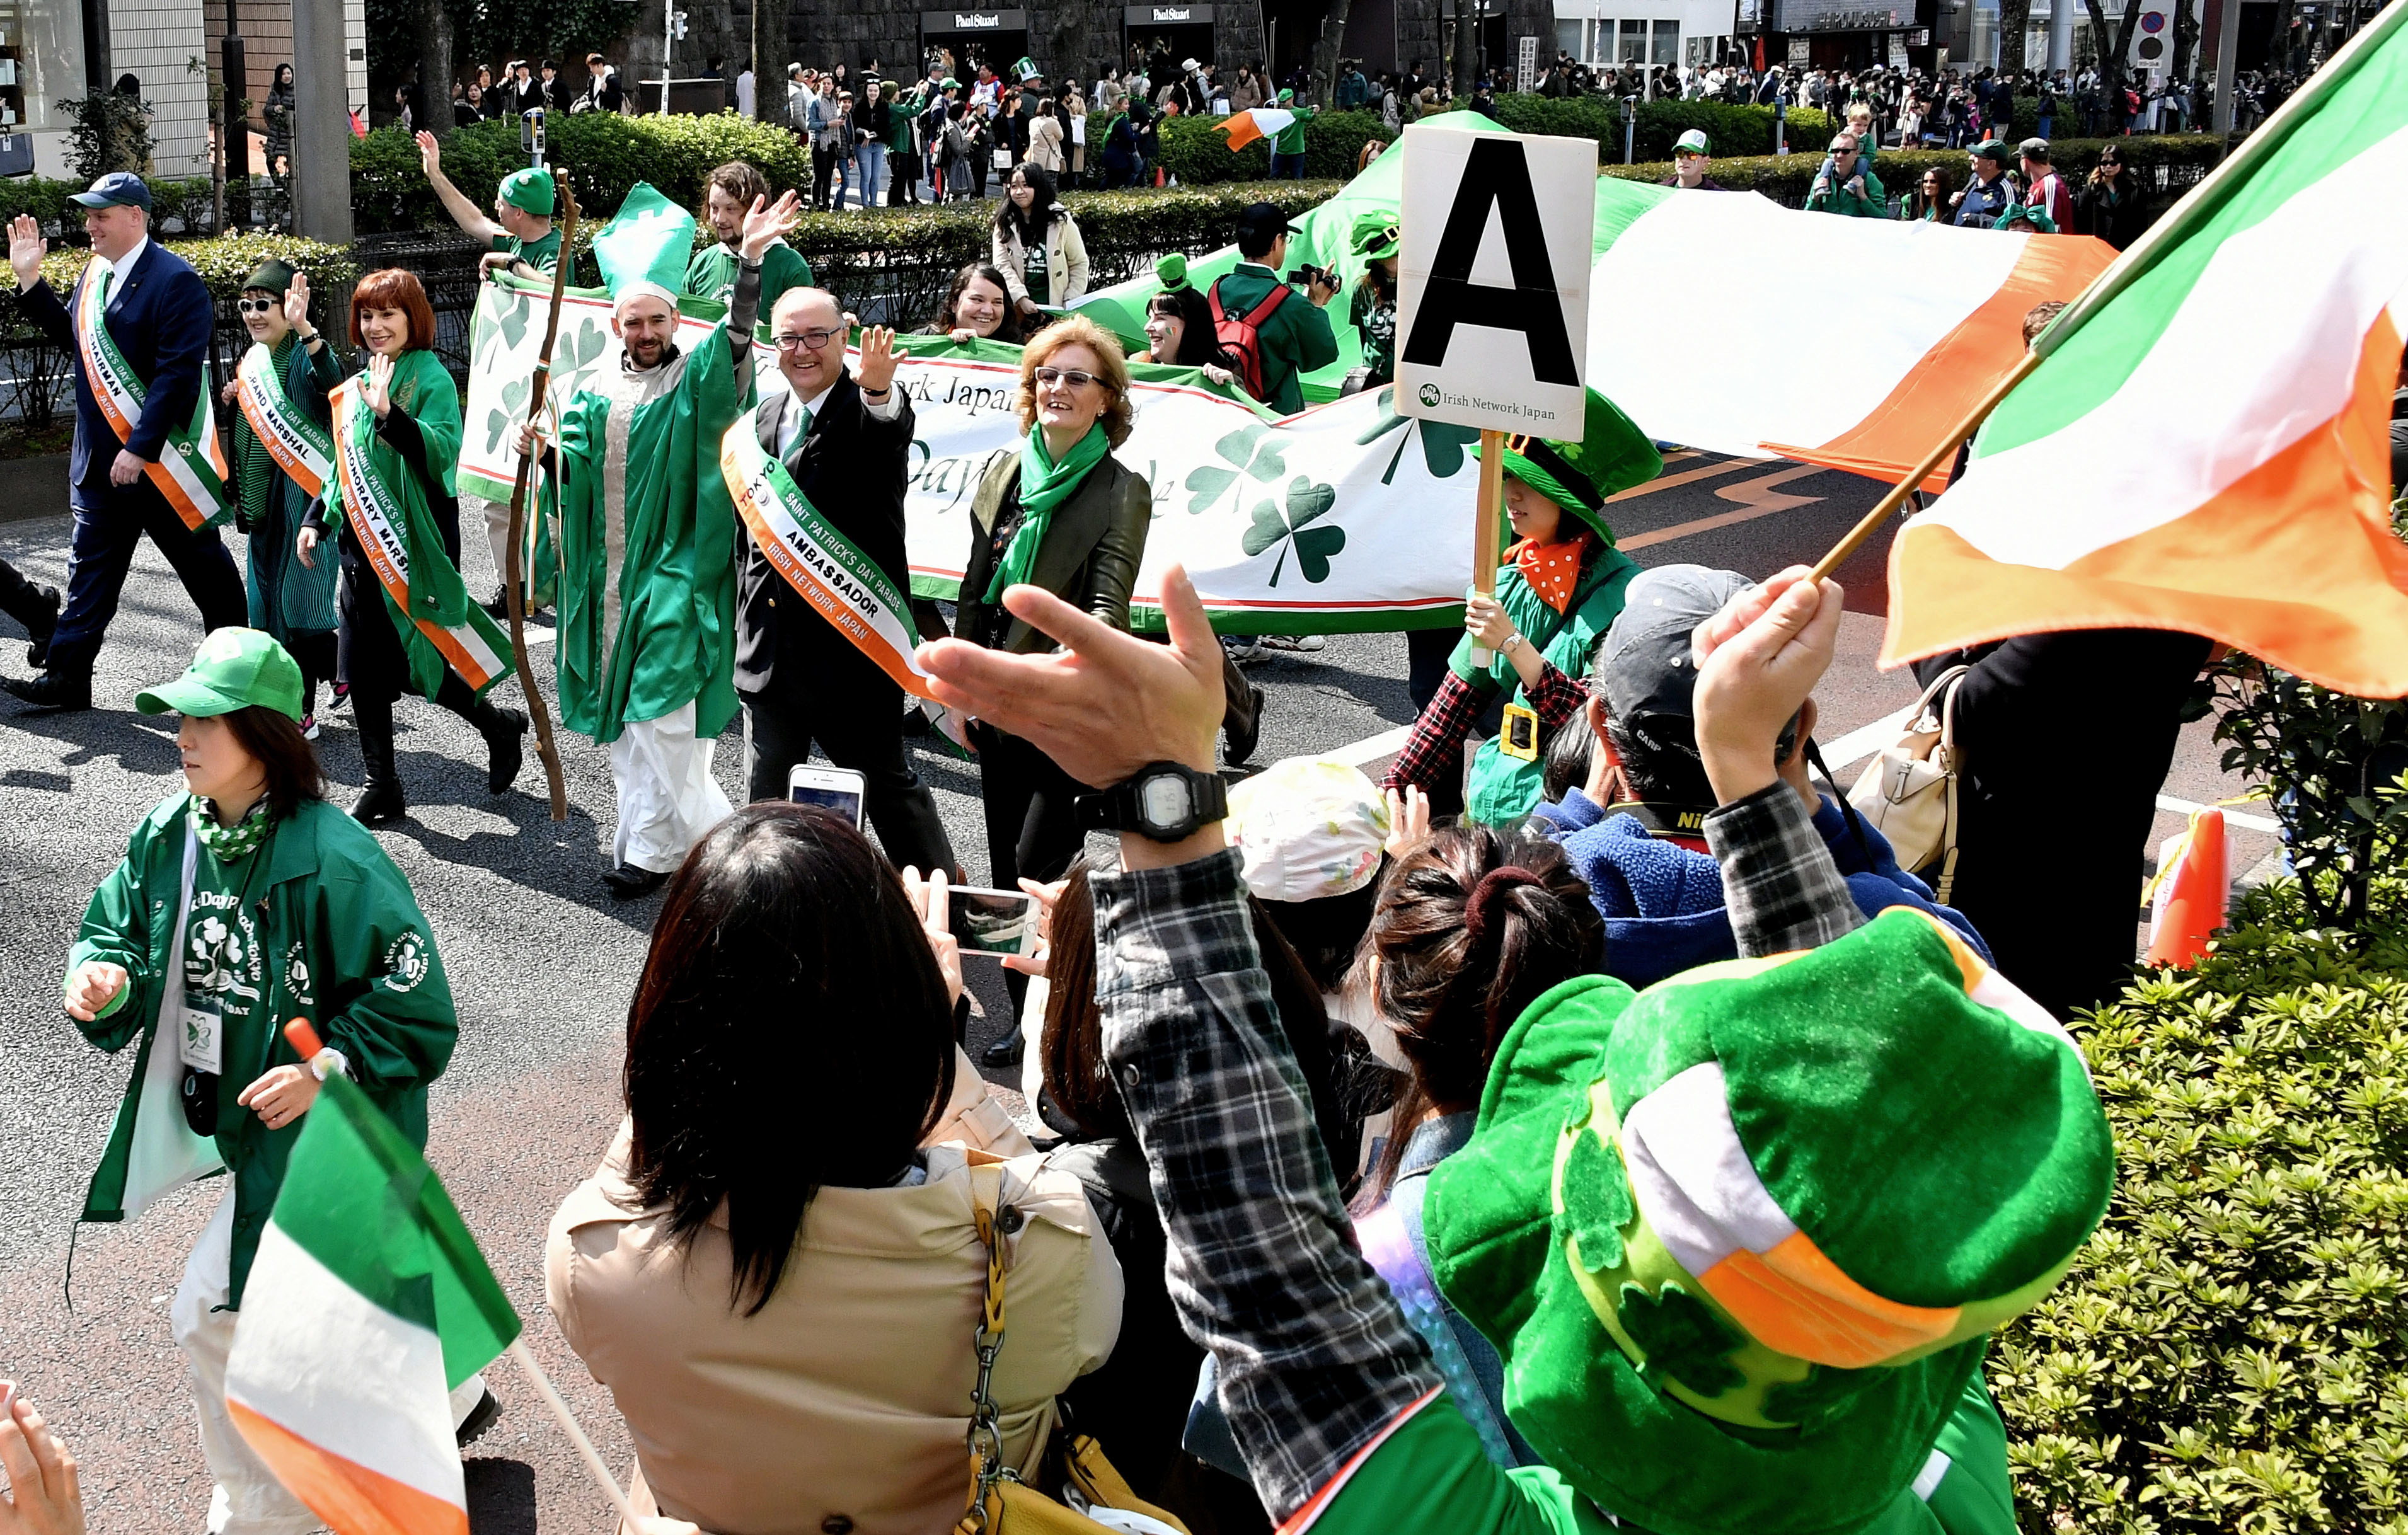 'St. Patrick' walks beside Irish Ambassador Paul Kavanagh (right) and Culture Minister Josepha Madigan in the St. Patrick's Day Parade on Omotesando-dori in Tokyo's Harajuku district on Sunday. About 1,530 people took part in the parade, which attracted 50,000 visitors. | YOSHIAKI MIURA